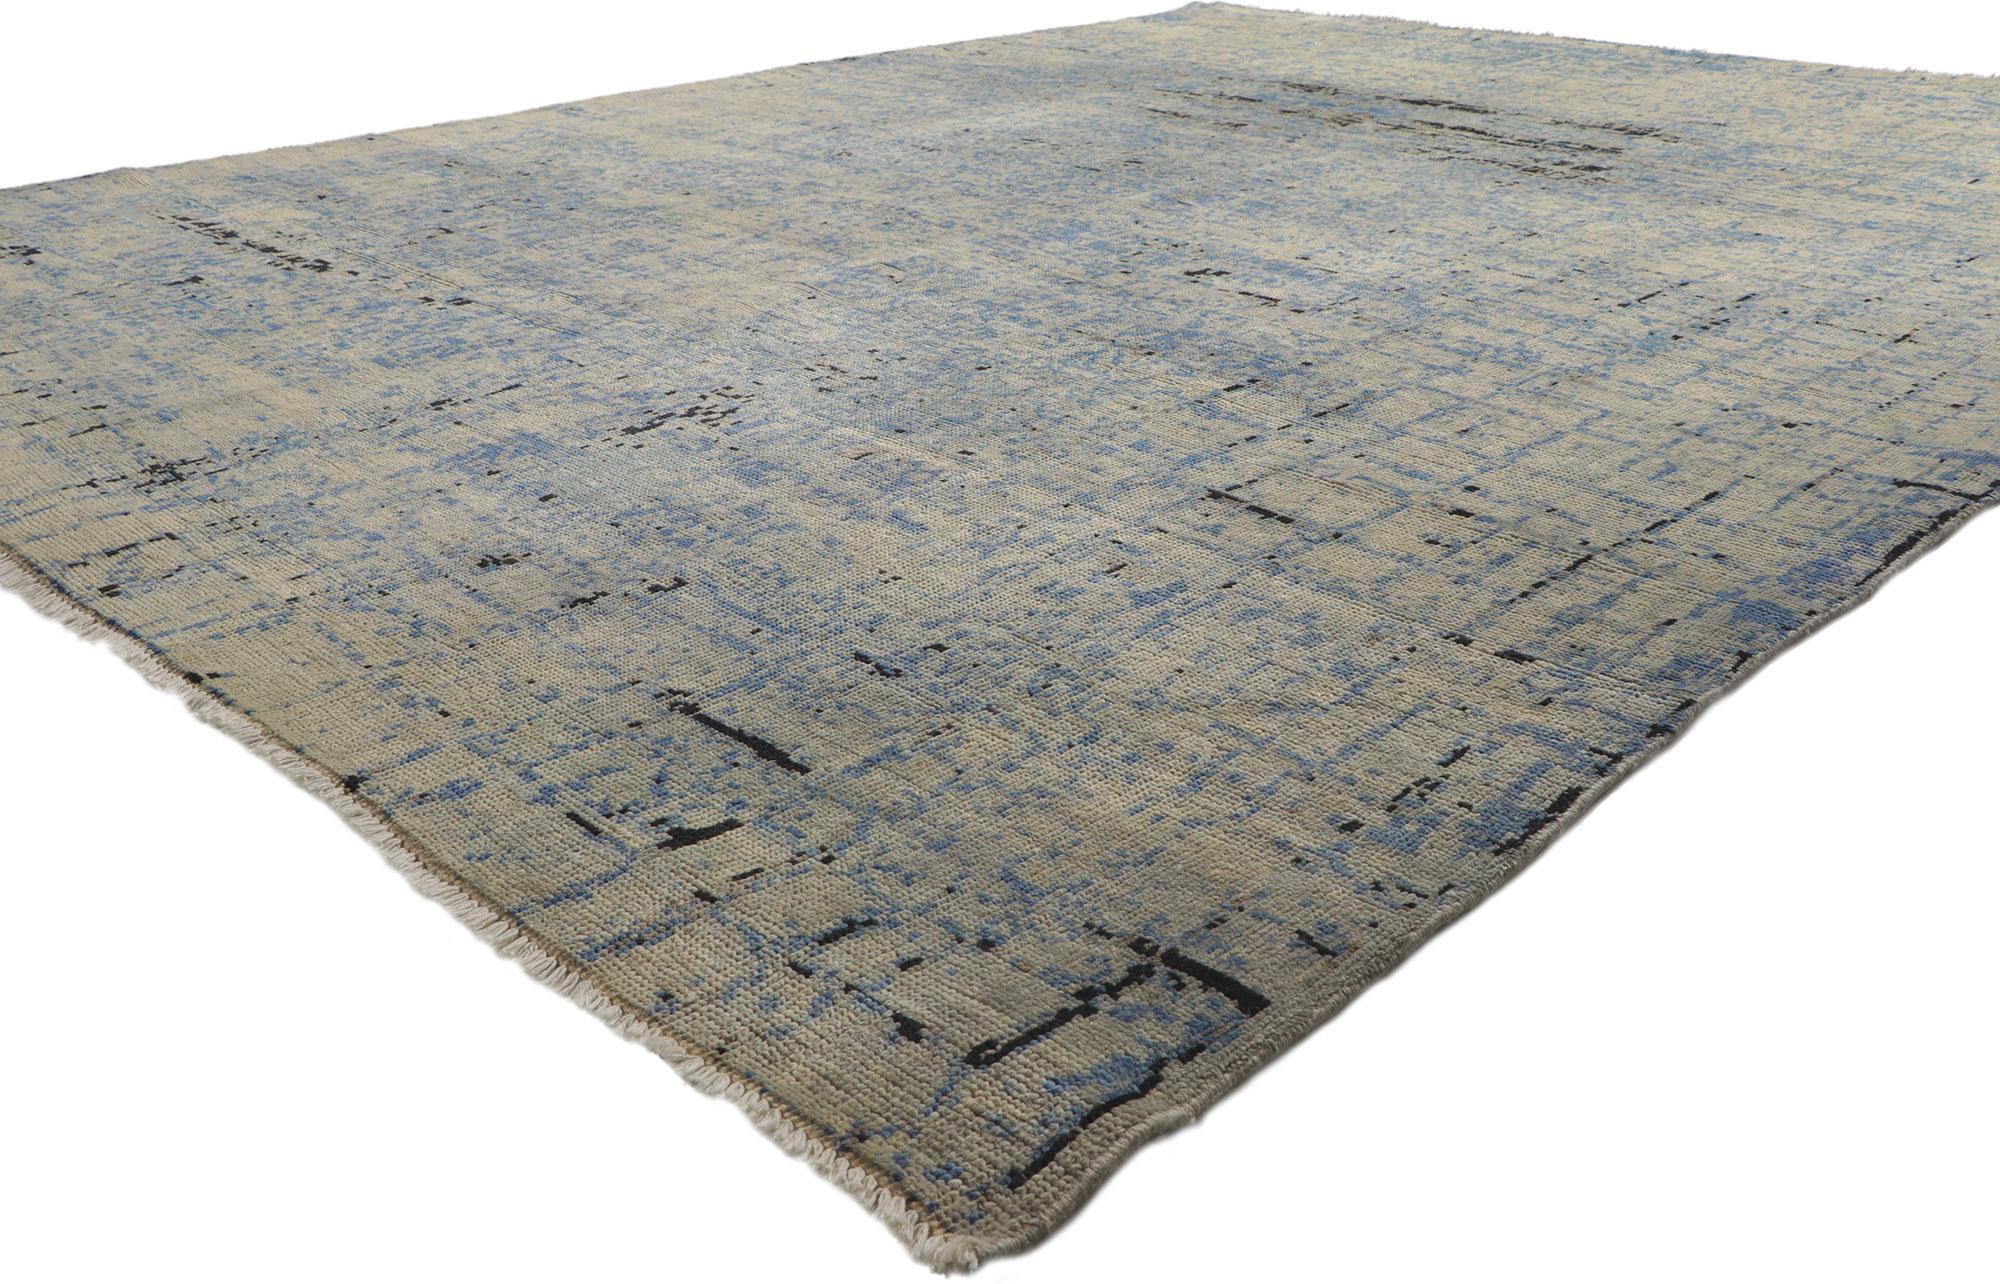 80726 New Contemporary Abstract rug, measures 09'00 x 11'05. Reflecting elements of abstract expressionism, incredible detail and texture, this hand knotted wool contemporary abstract rug awakens the soul with its elevated style. The esoteric design